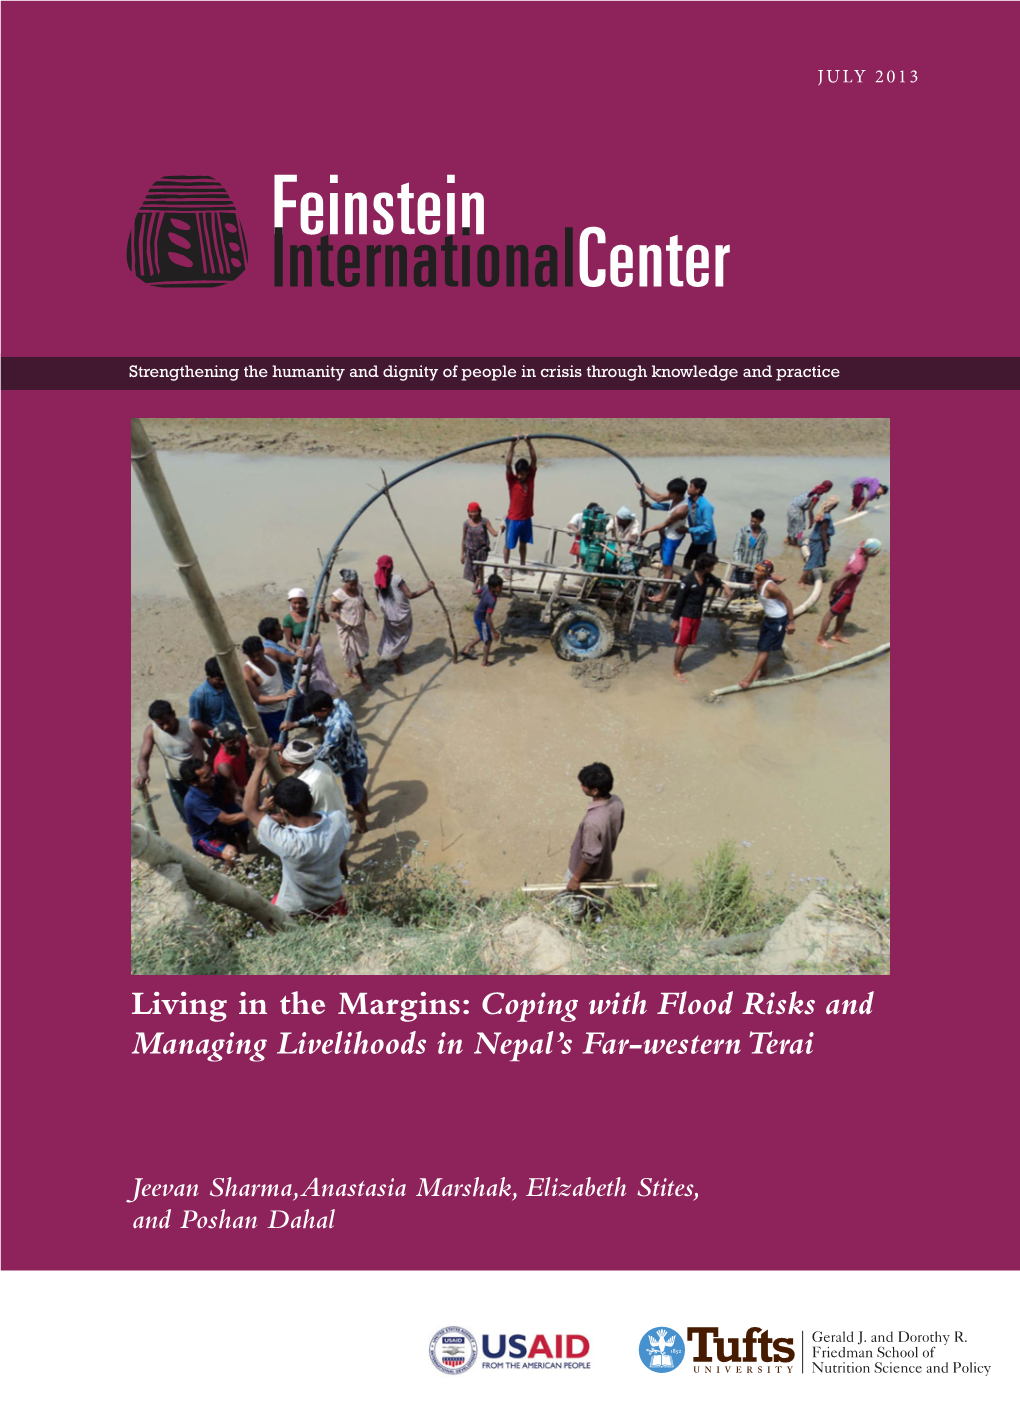 Coping with Flood Risks and Managing Livelihoods in Nepal's